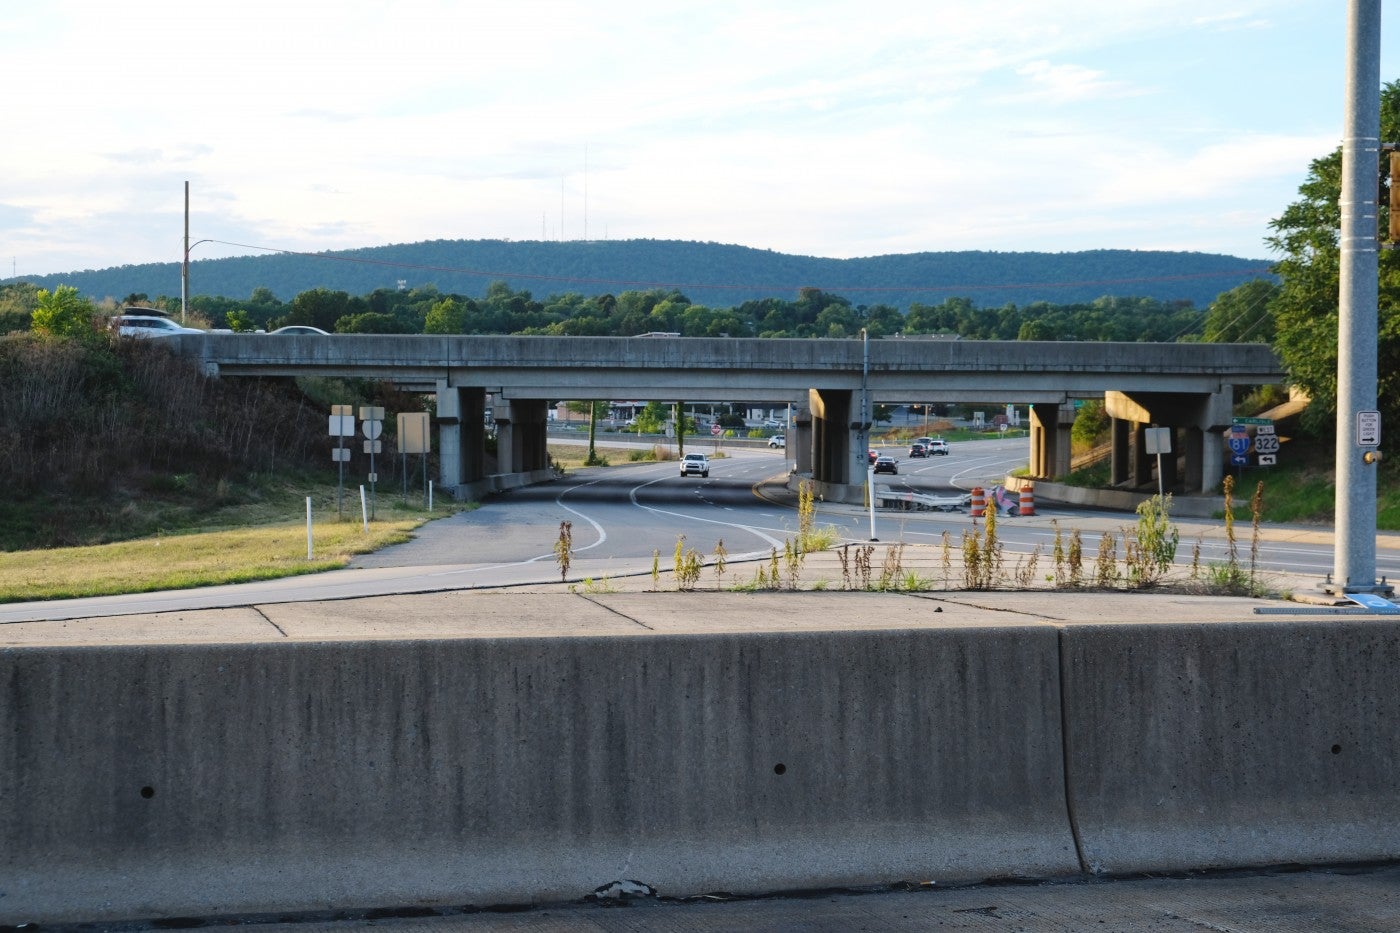 An intersection of a roadway with a concrete barrier in the foreground and a concrete bridge in the background. Trees and a low mountain range can be seen in the distance